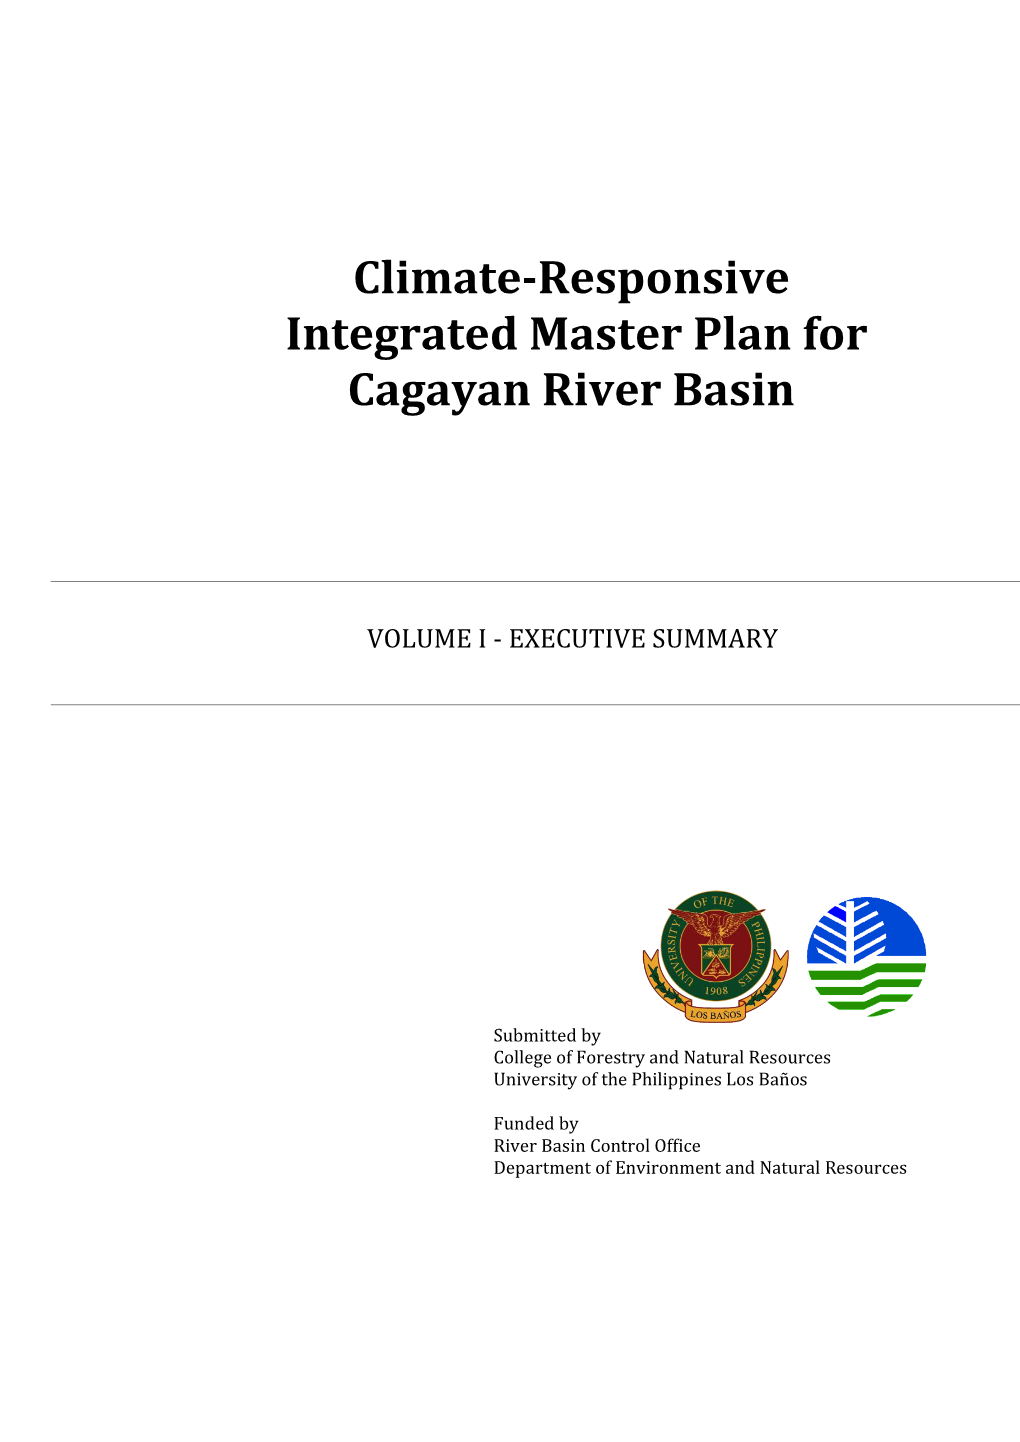 Climate-Responsive Integrated Master Plan for Cagayan River Basin